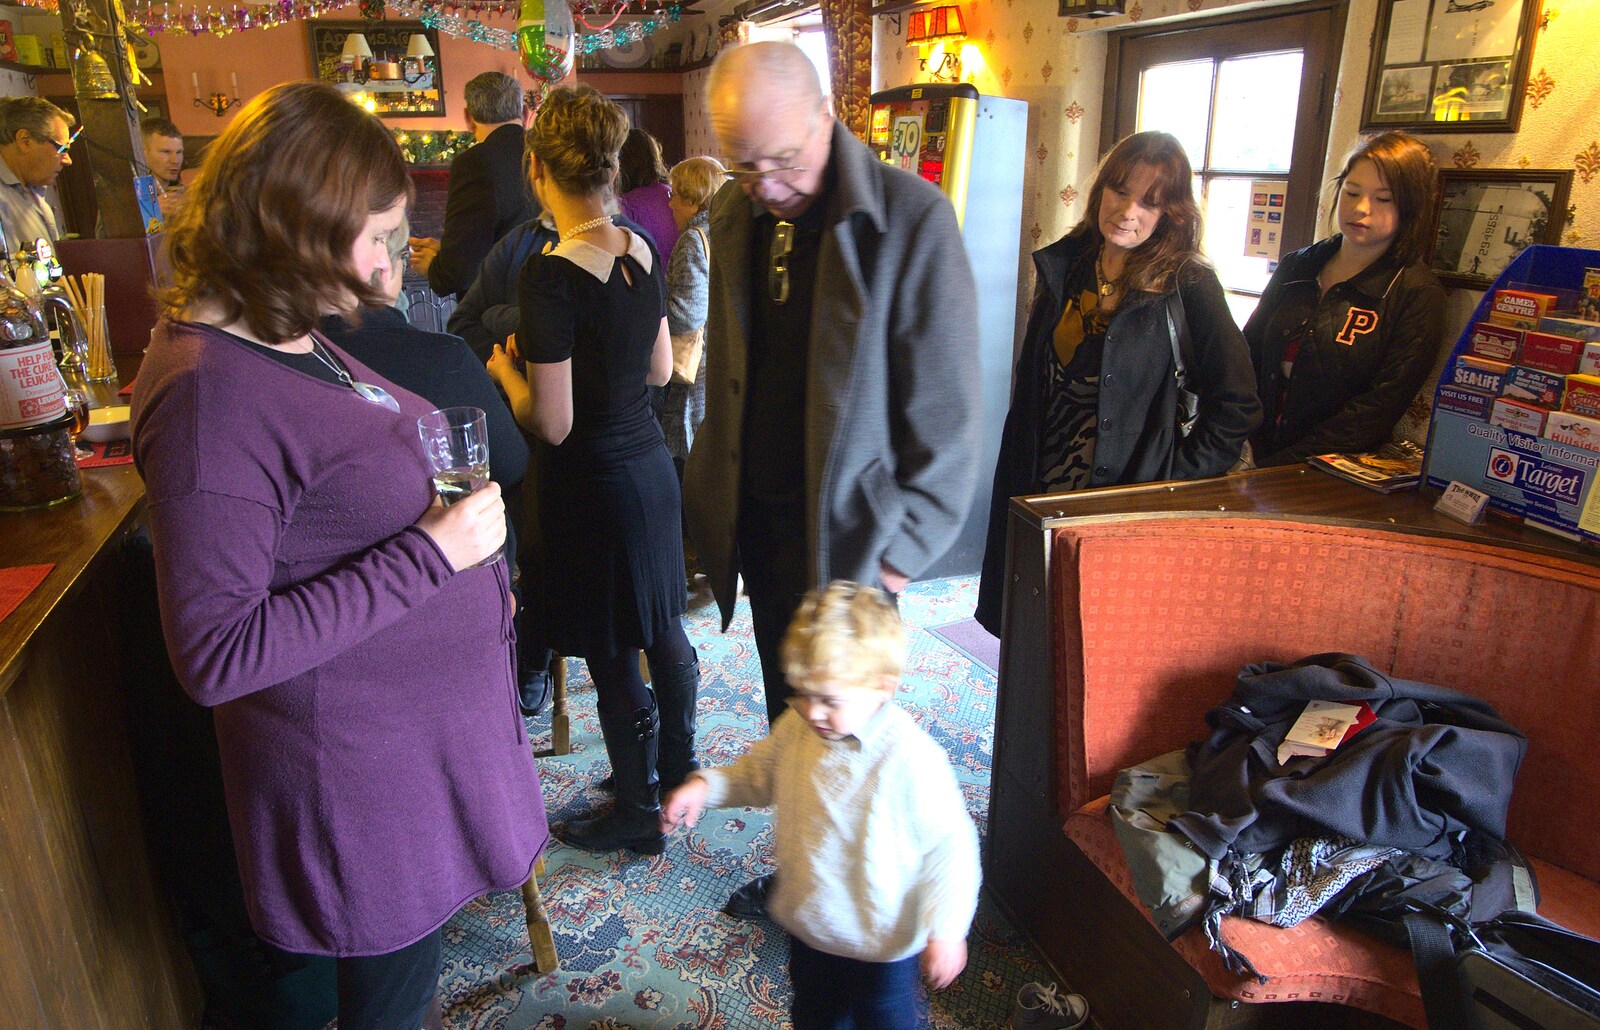 Grandad appears from Christmas Day in the Swan Inn, Brome, Suffolk - 25th December 2011